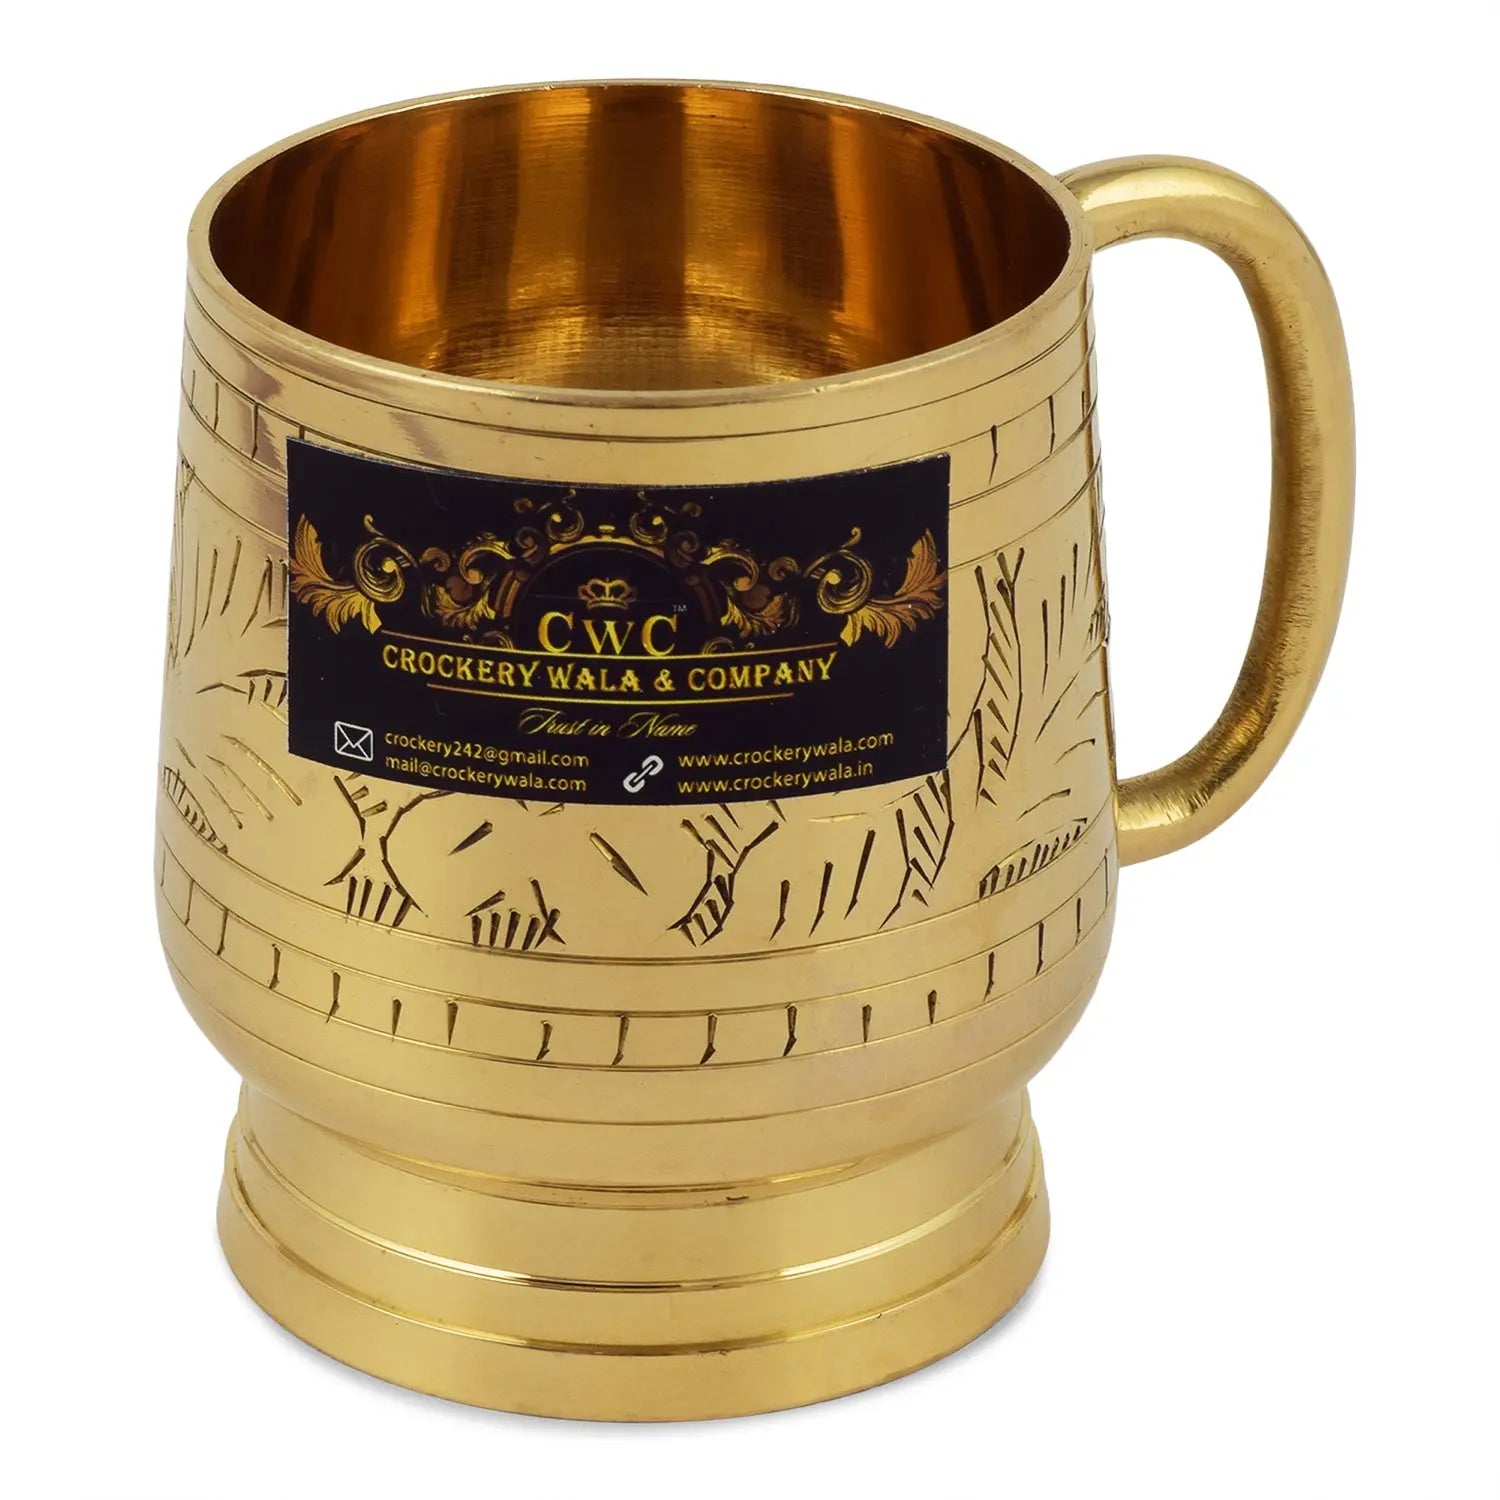 Pure Brass Etching Coffee Tea Mug Cup For Warm Beverages Drinkware Small - CROCKERY WALA AND COMPANY 